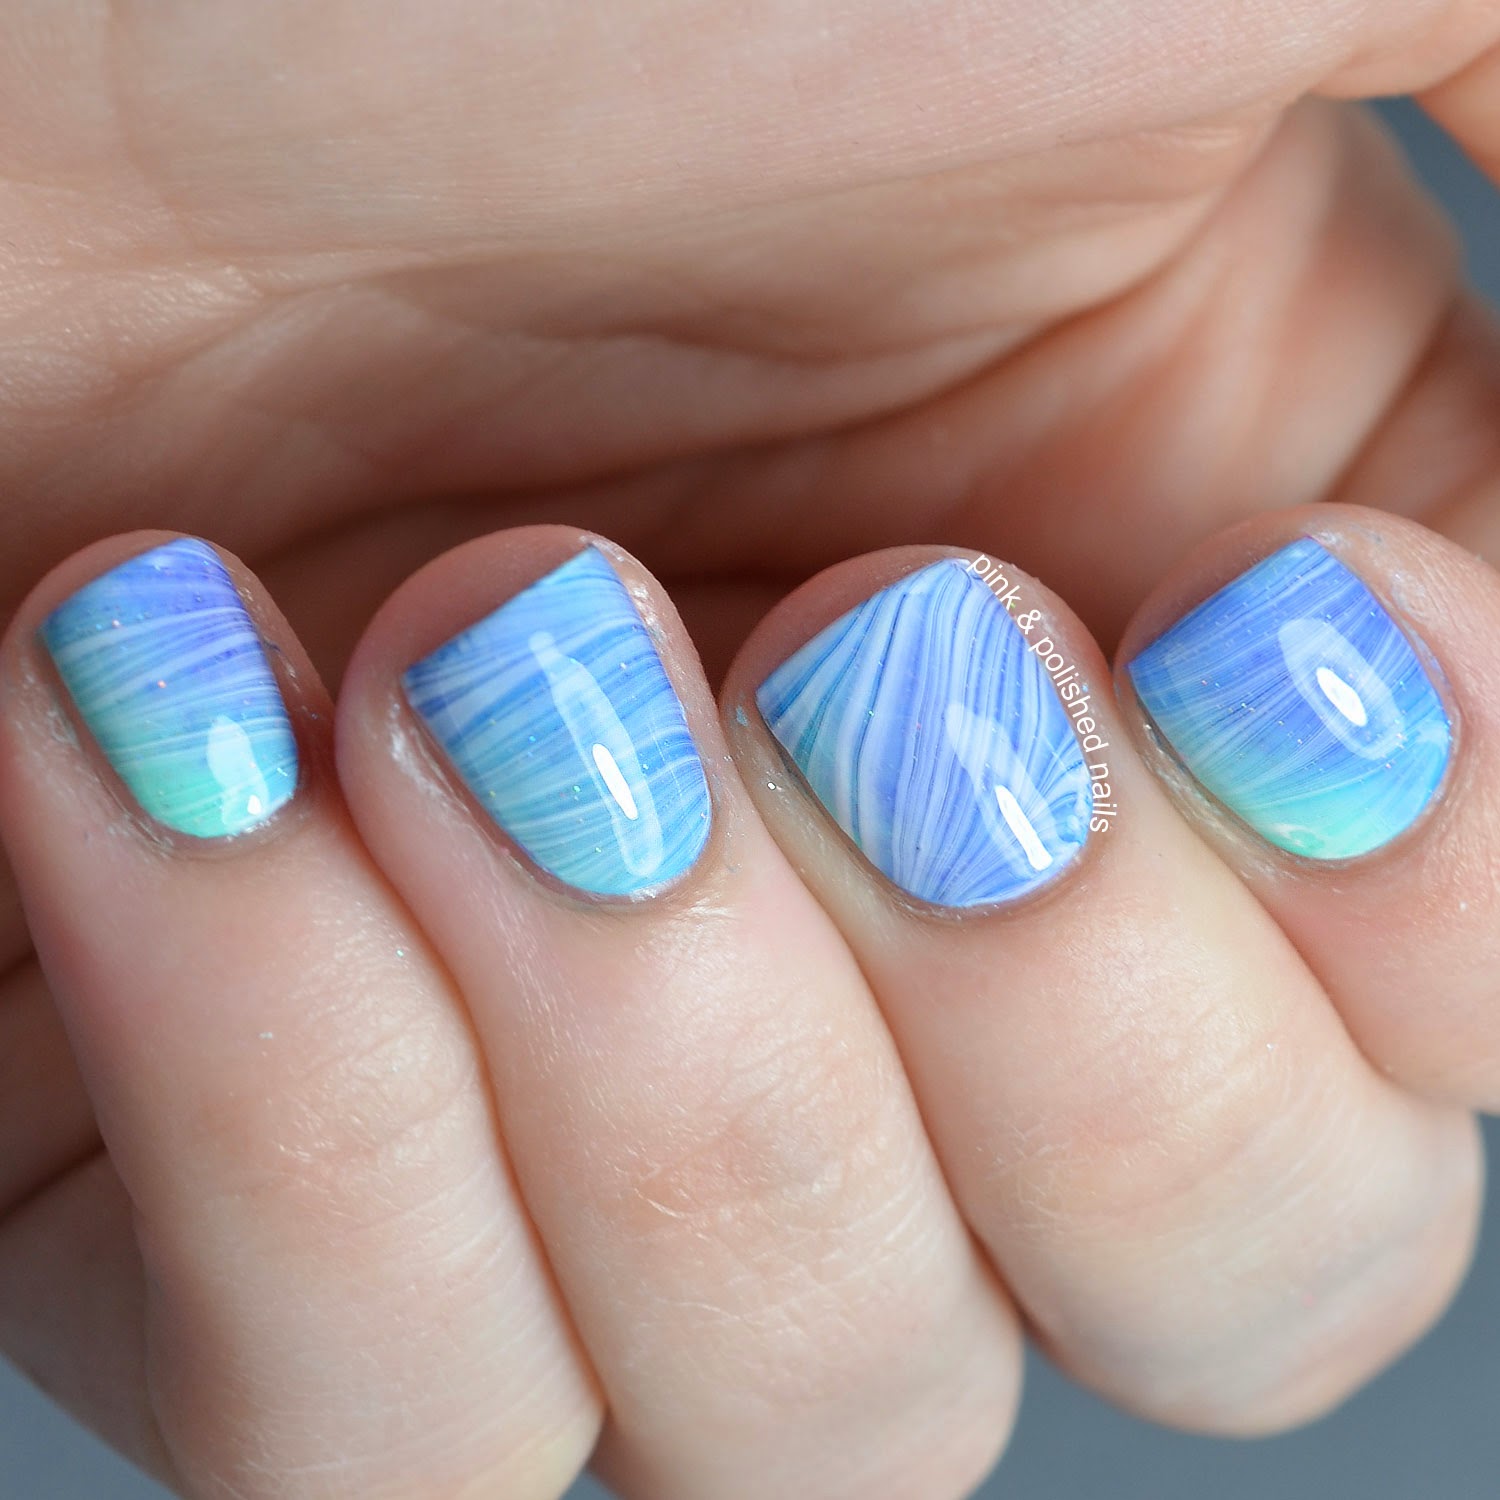 Pink & Polished: Spot Gradient with Water Marble Overlay